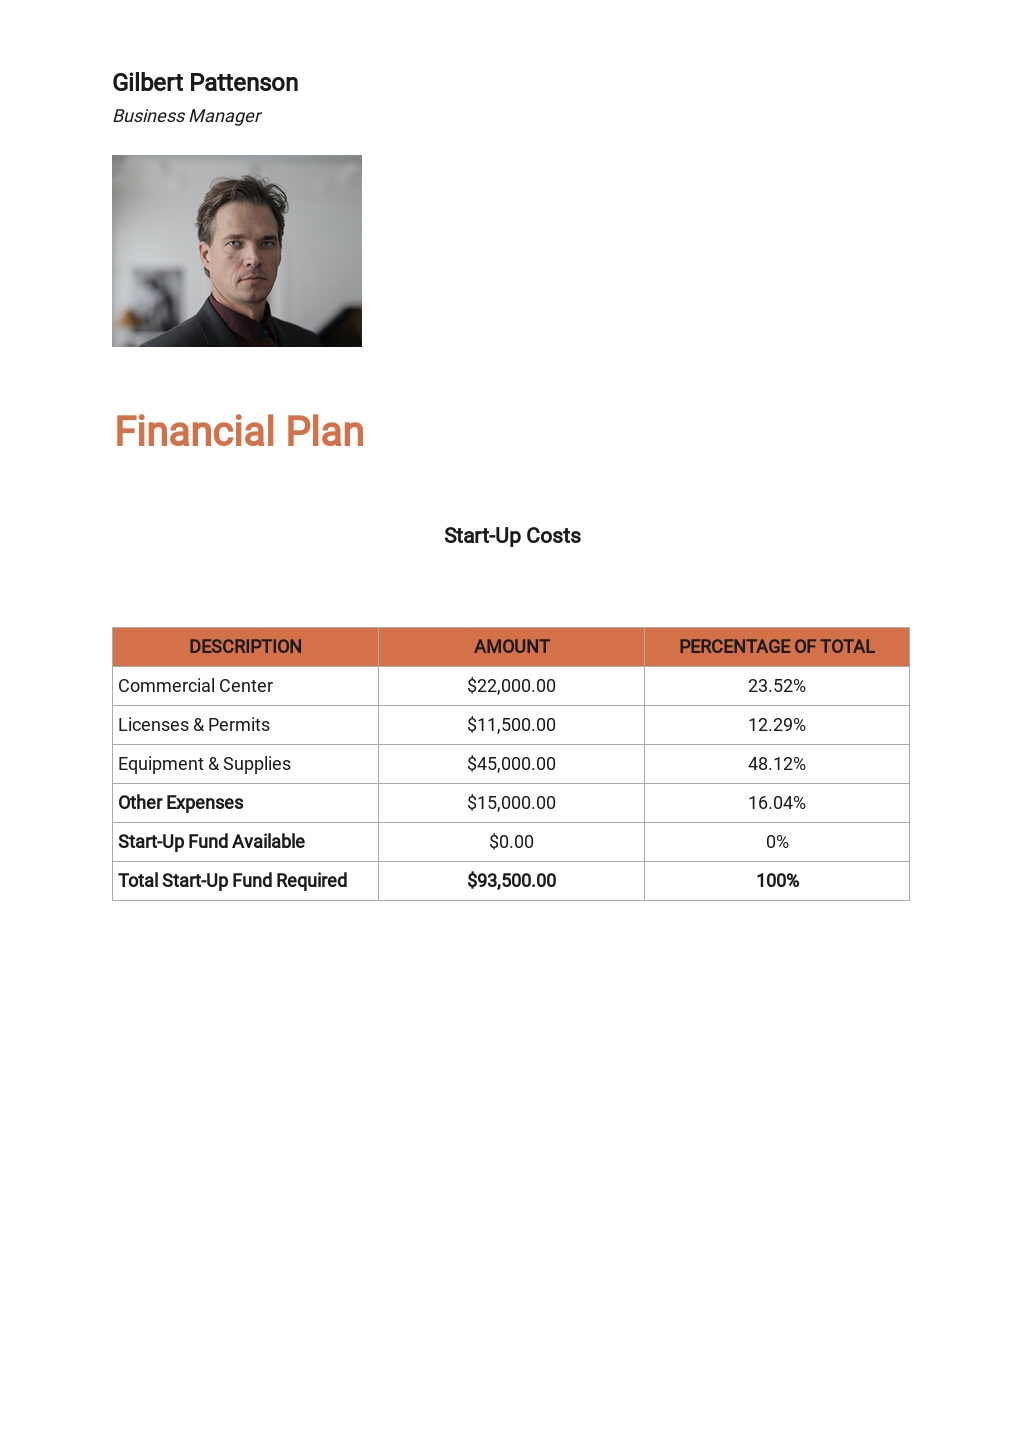 Human Resources Consulting Business Plan Template 6.jpe